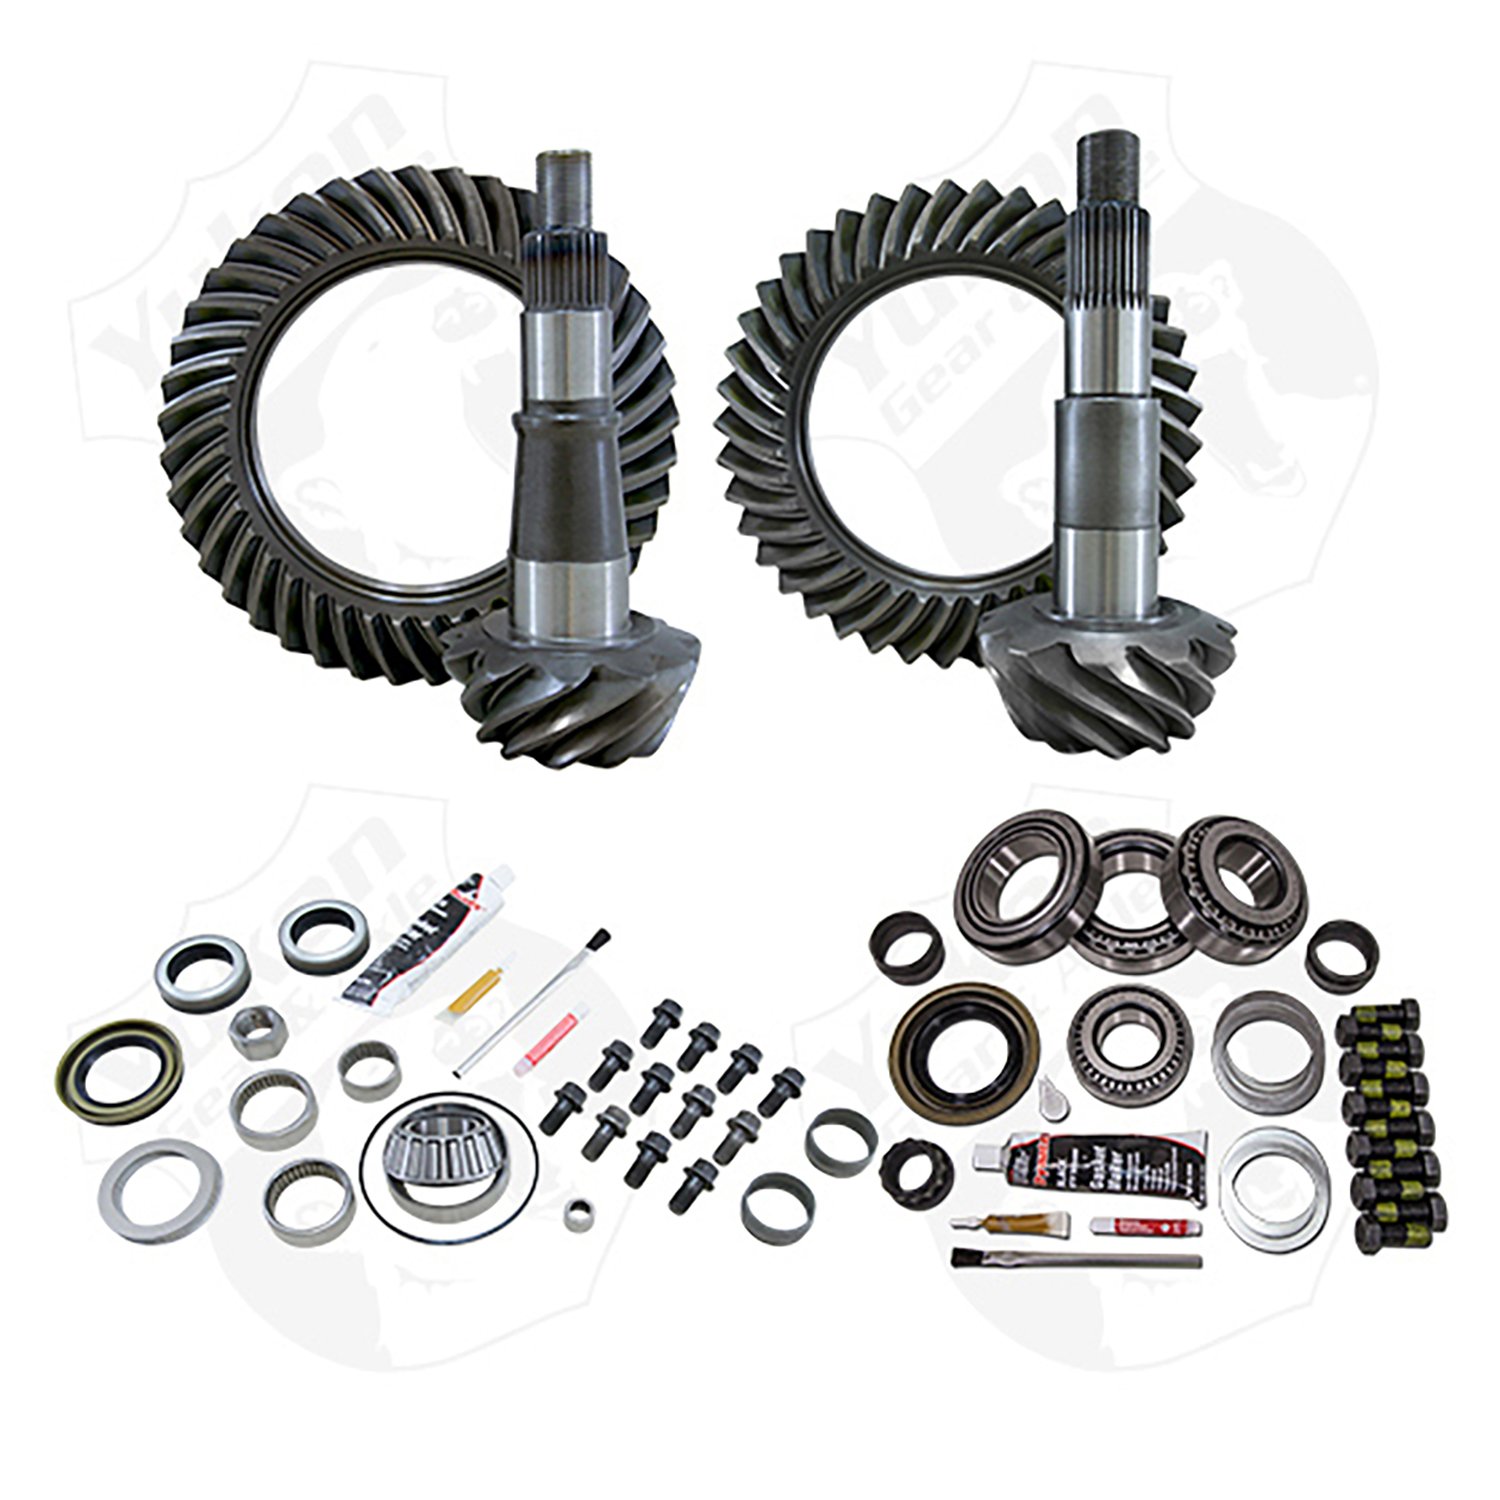 Gear & Install Kit Package For 2011-2013 Ram 2500 And 3500, 4.56 Ratio